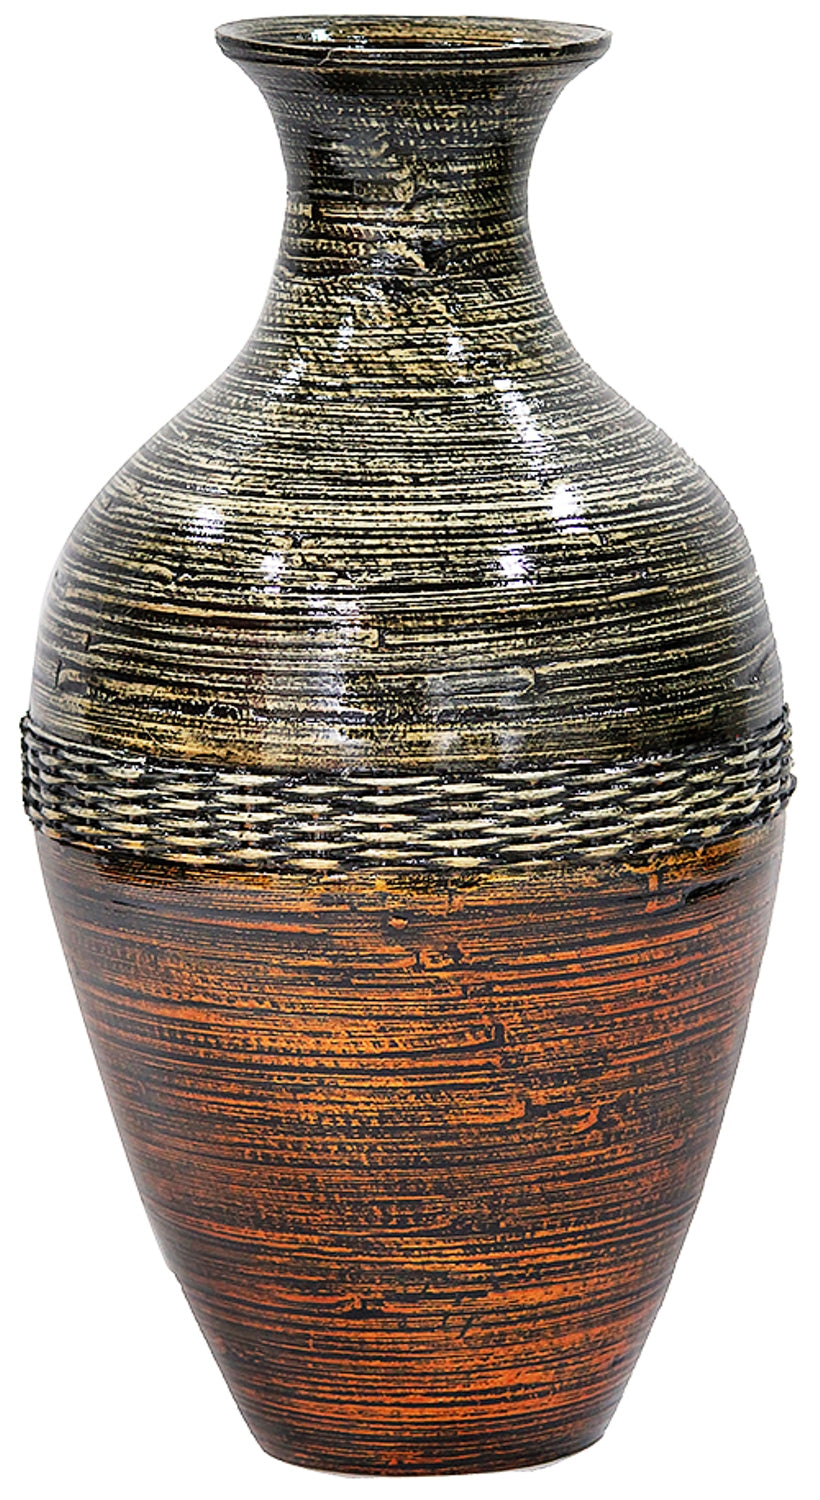 Tabba White to Gray with Coconut Shell Spun Bamboo Vase